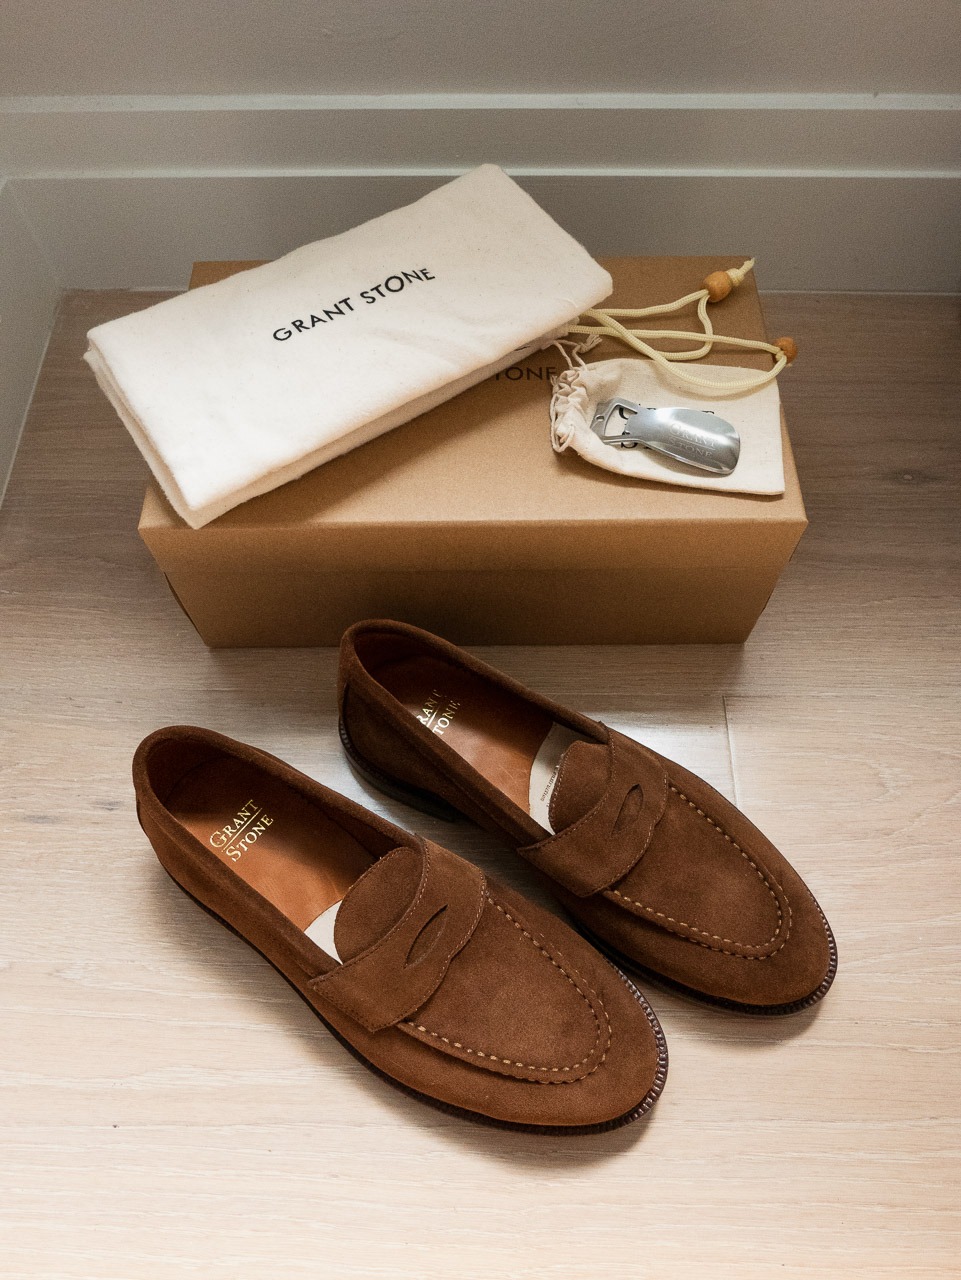 grant stone shoebox with shoe bags and brown suede loafers